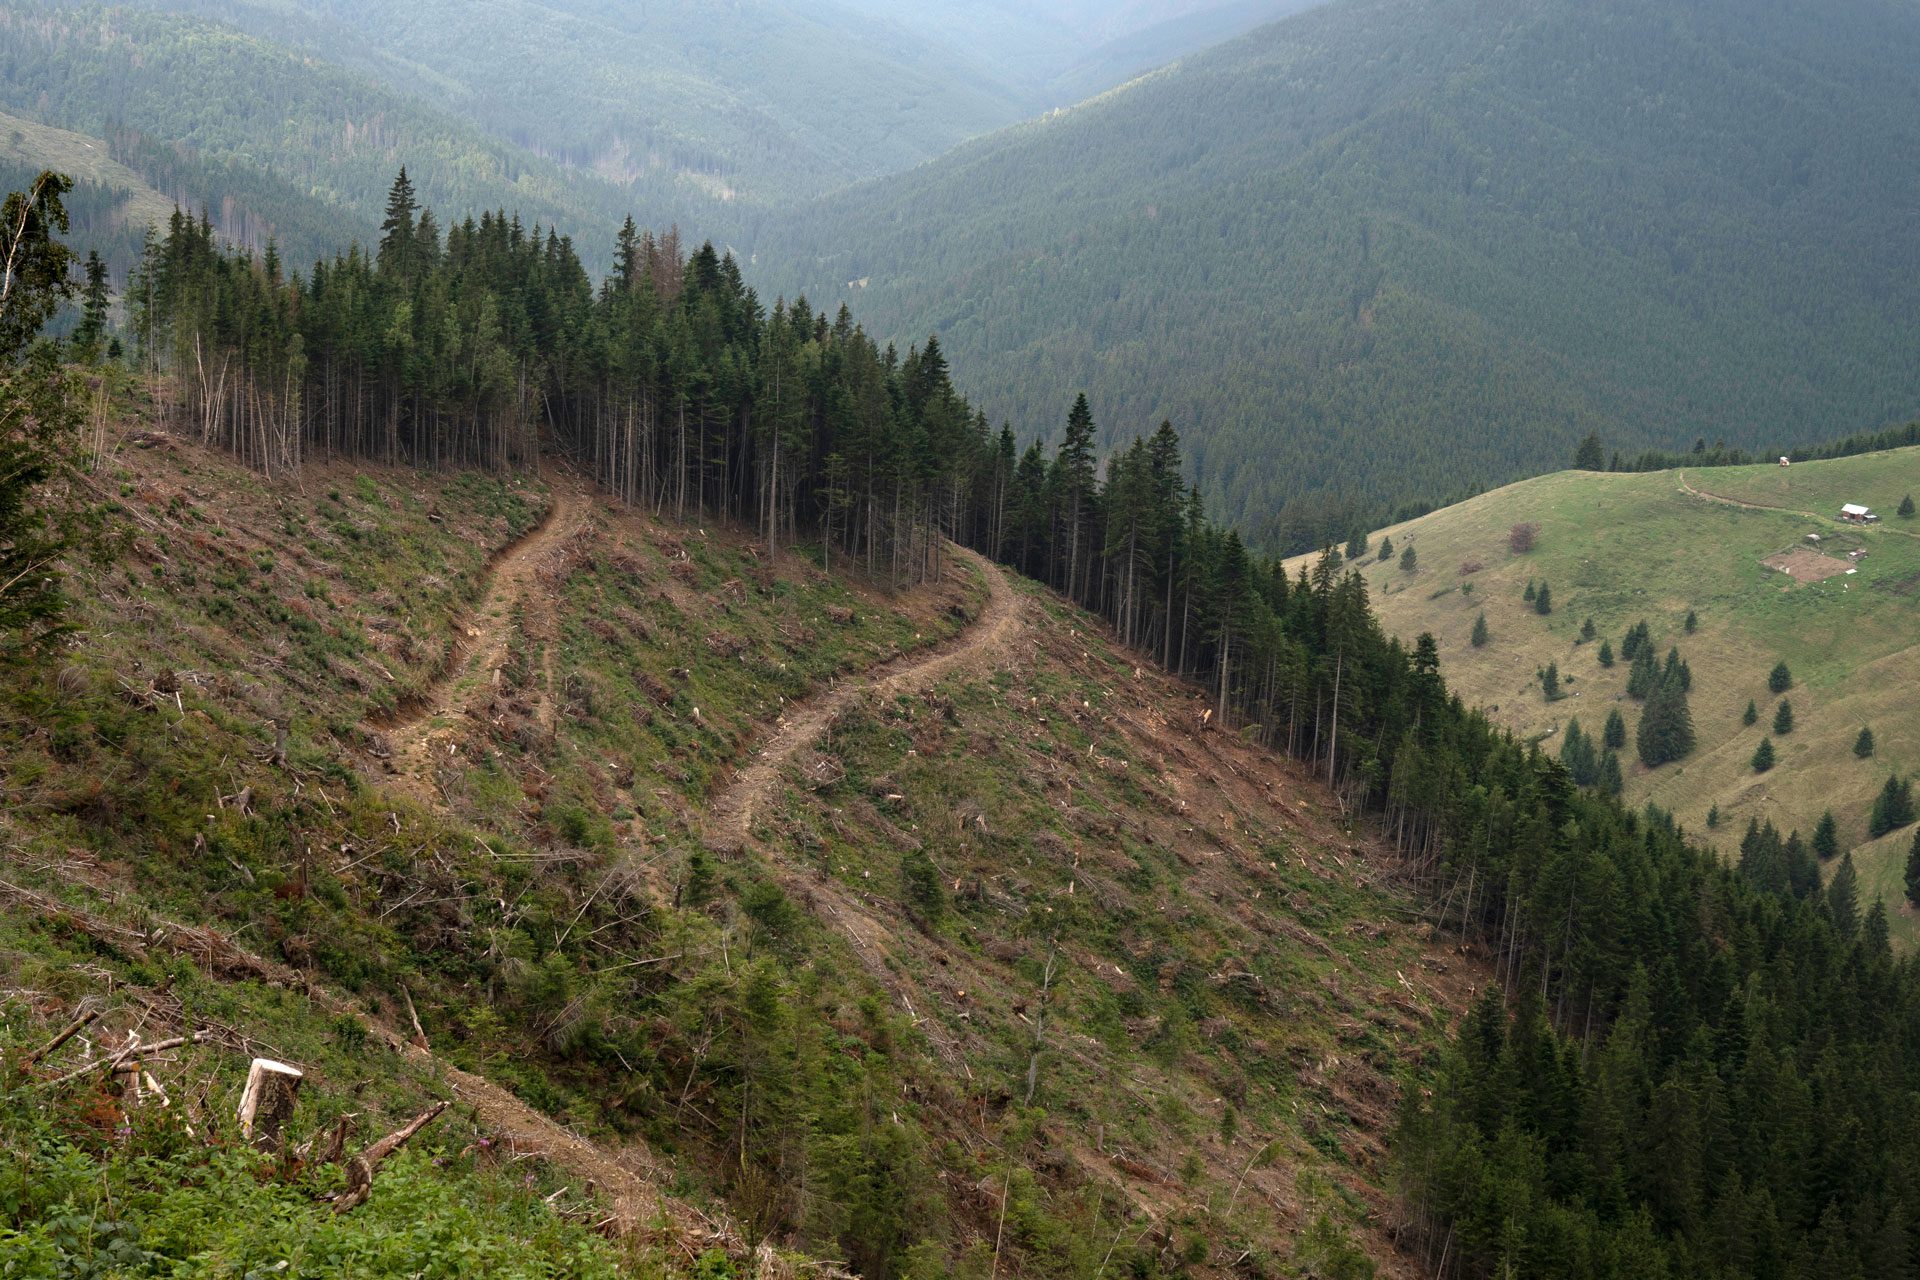 Europe Sacrifices Ancient Forests for Energy